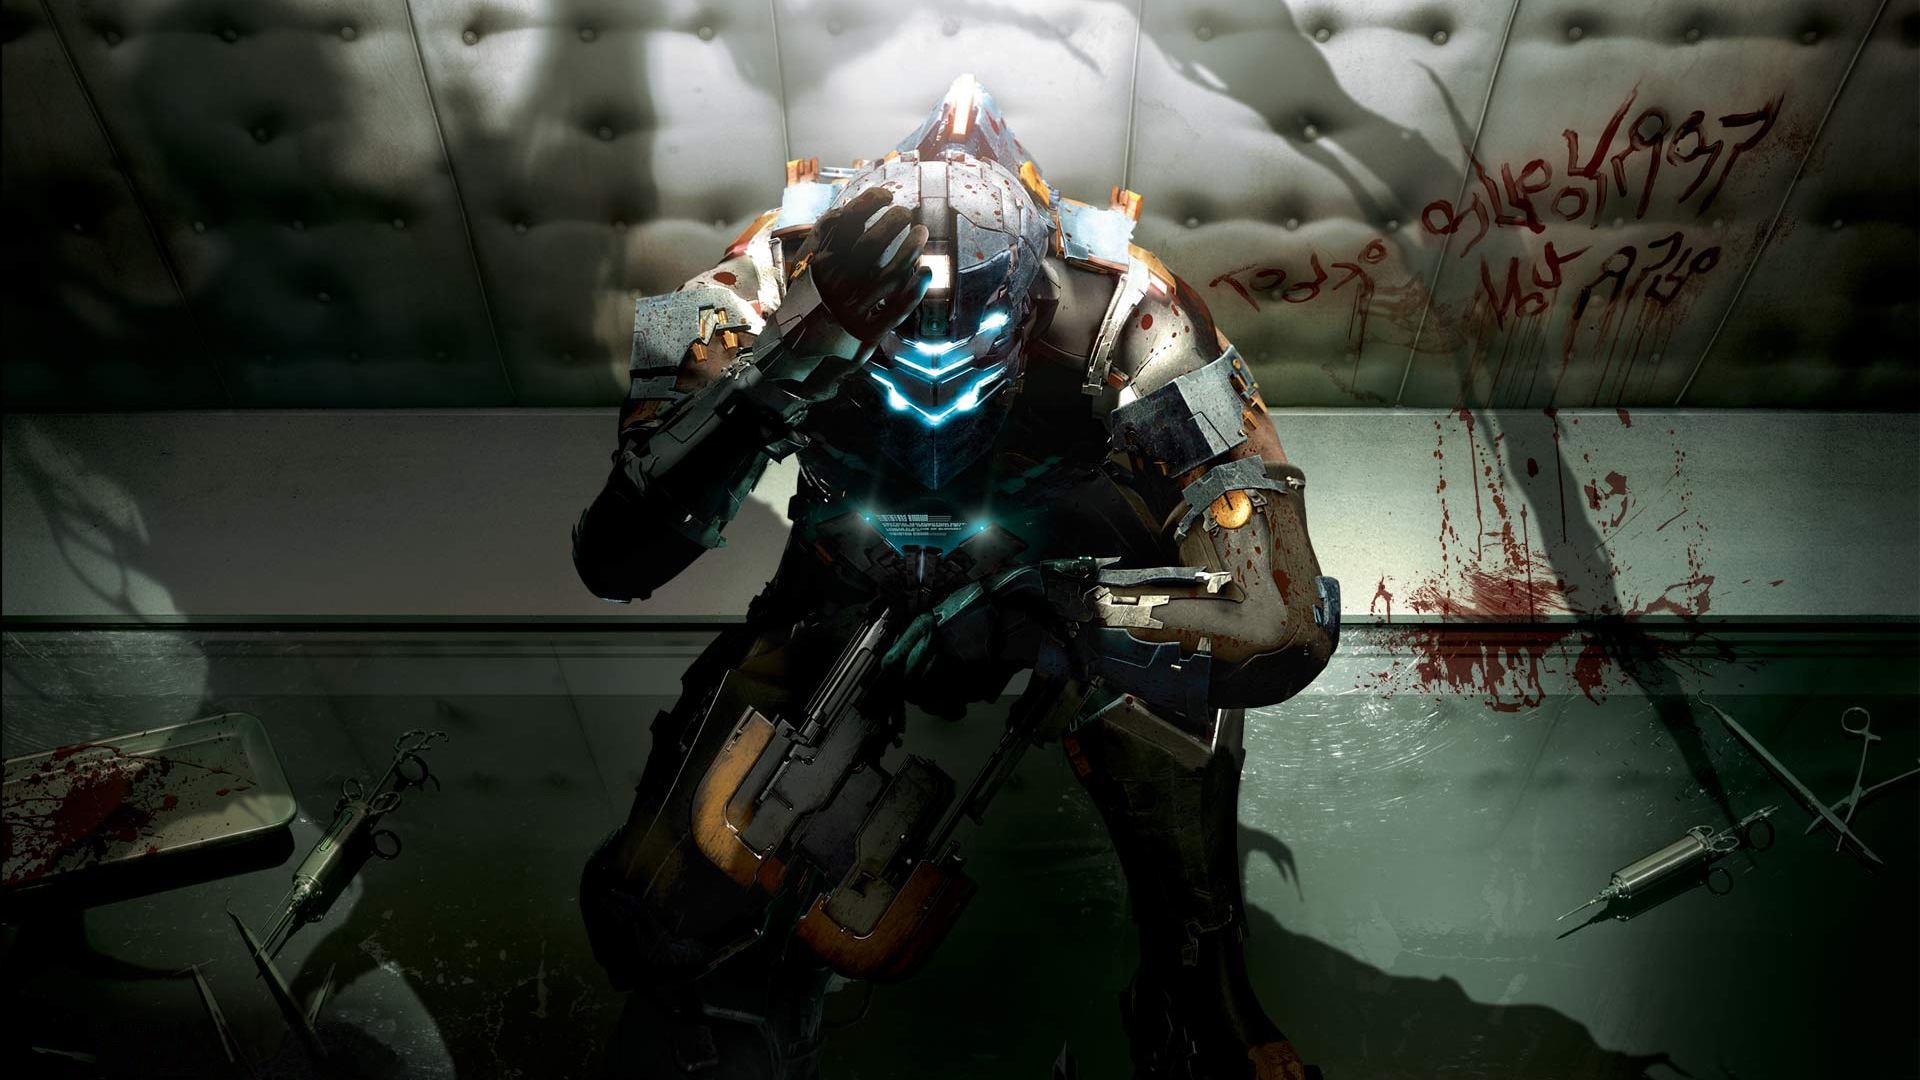 General 1920x1080 video games Dead Space Dead Space 2 science fiction horror blood video game art